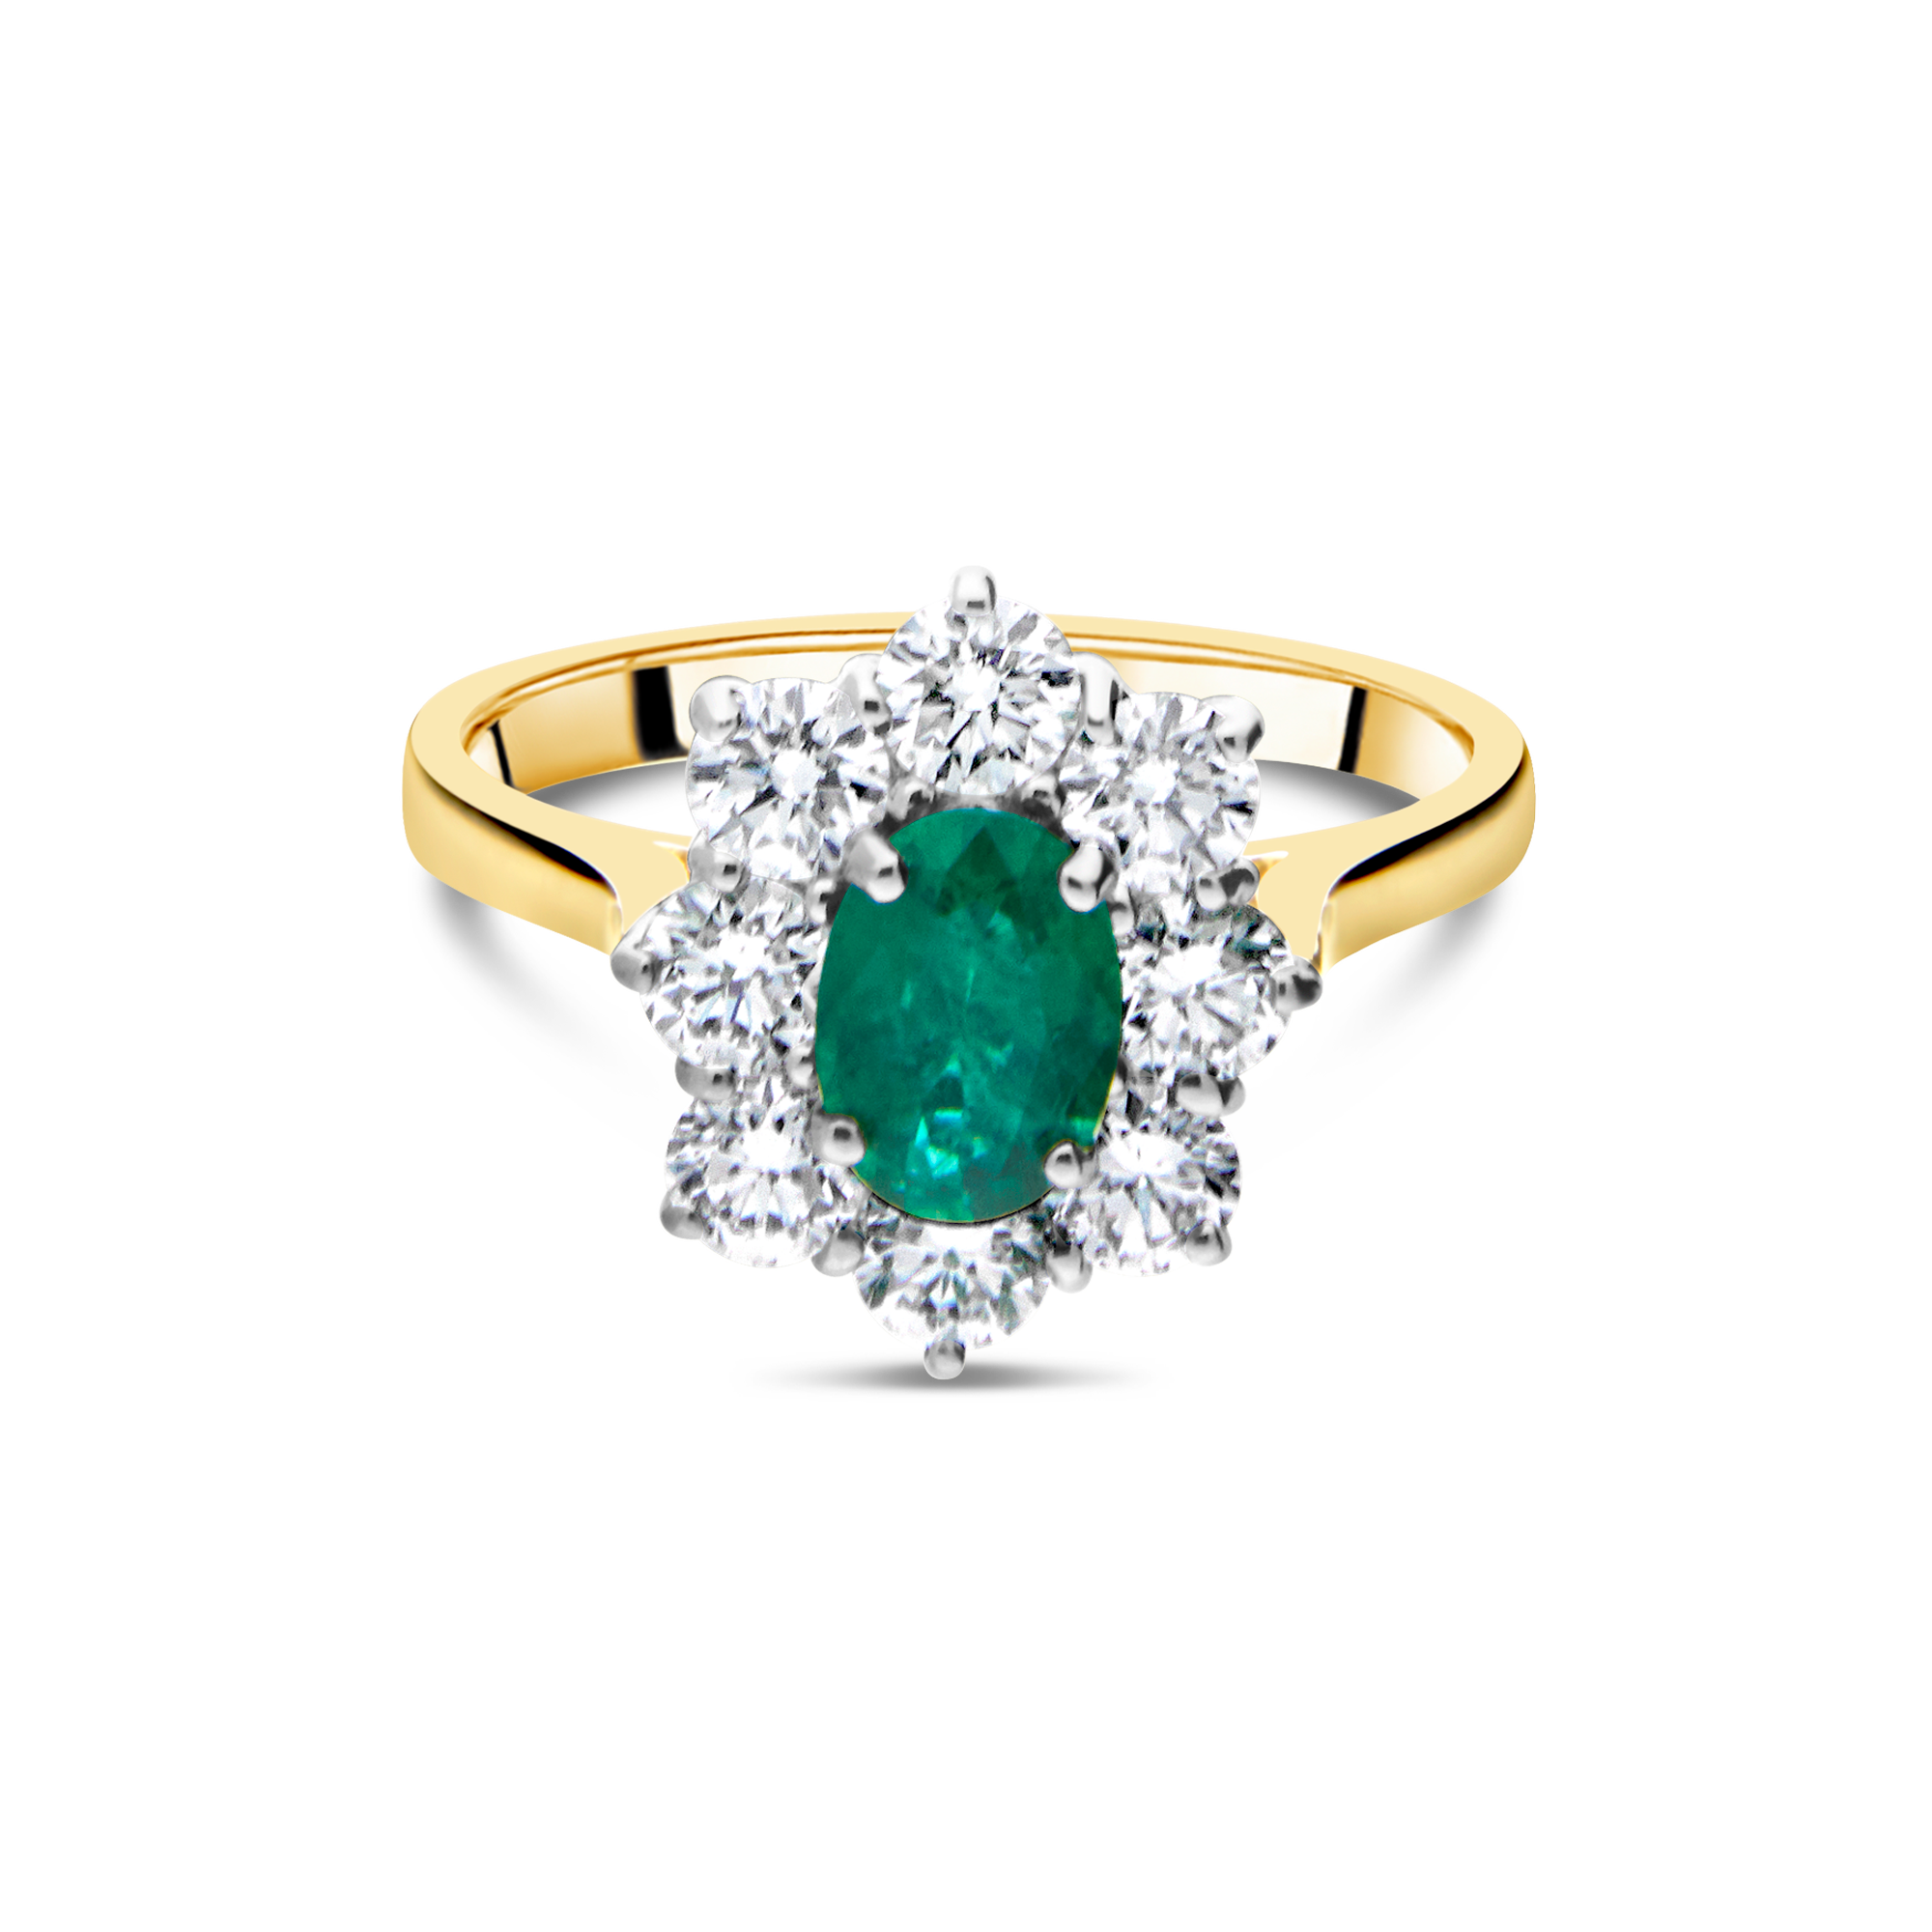 The "Diana" Emerald and Diamond, Yellow Gold